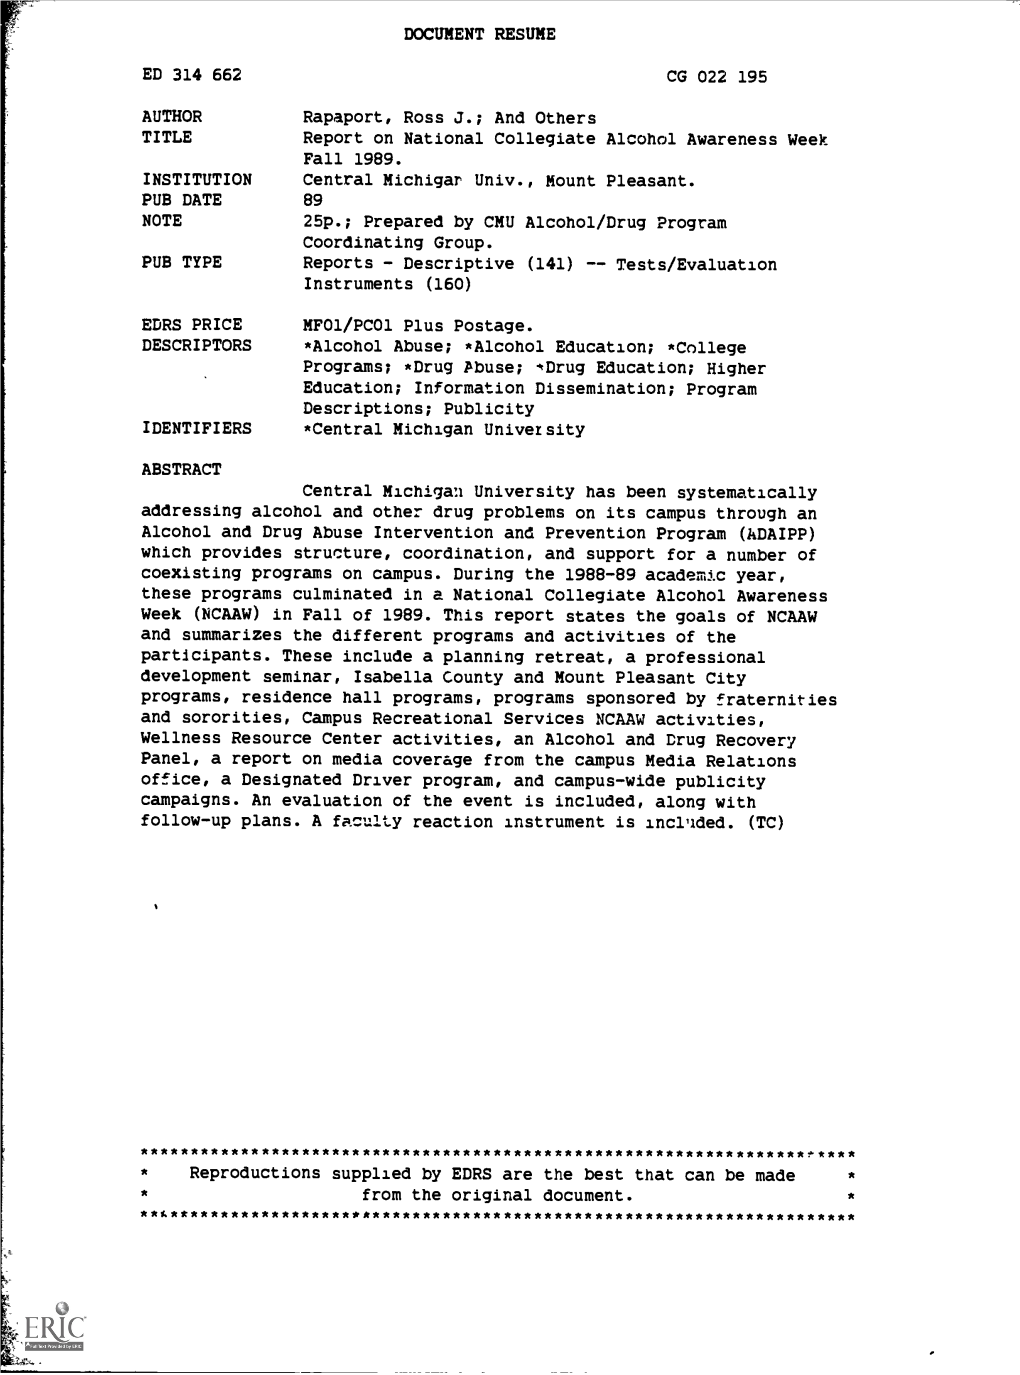 Report on National Collegiate Alcohol Awareness Week Fall 1989. INSTITUTION Central Michigar Univ., Mount Pleasant